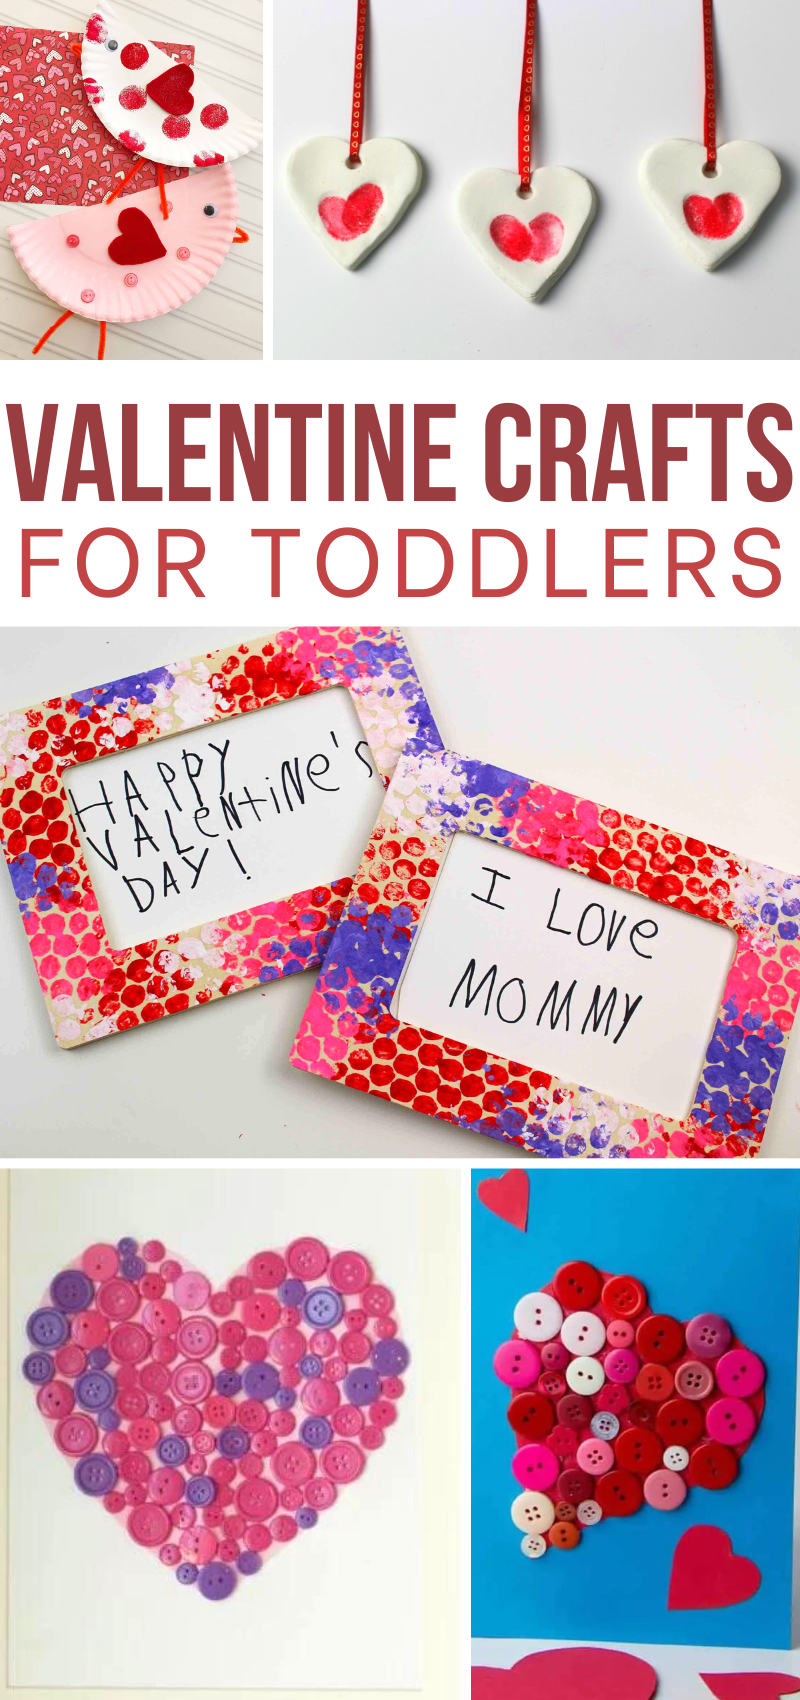 Valentines Day Crafts for Toddlers - Frosting and Glue- Easy crafts, games,  recipes, and fun